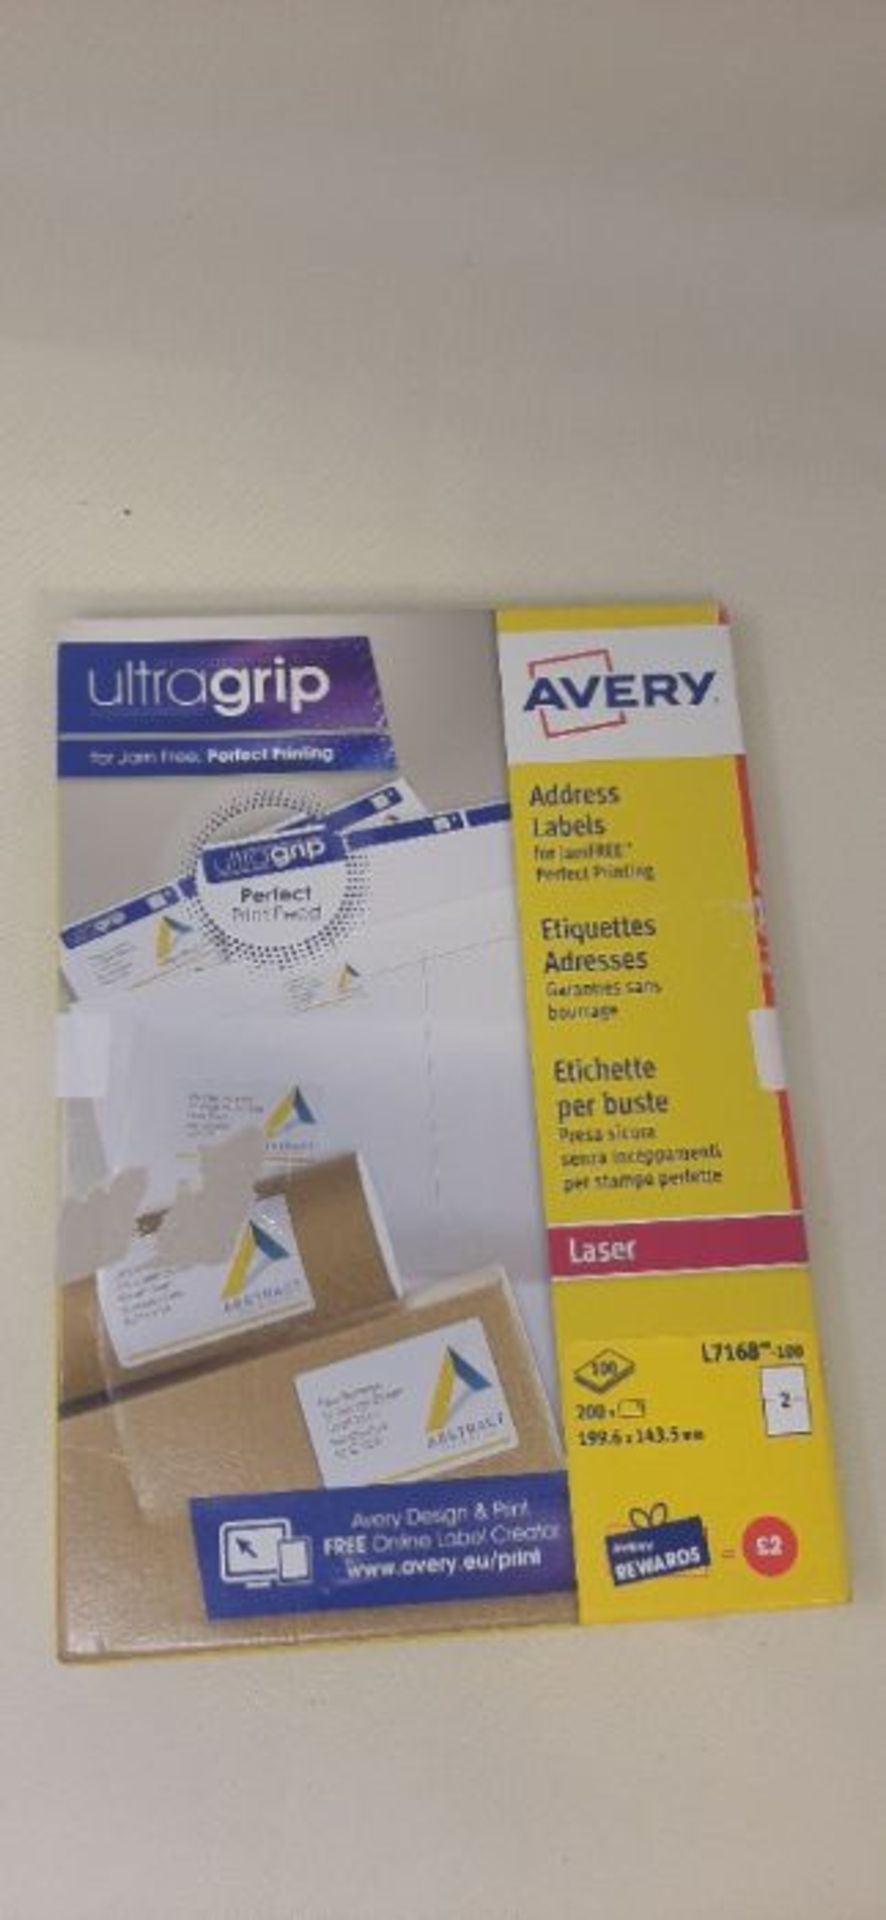 Avery L7168 Self Adhesive Parcel Shipping Labels, Laser Printers, 2 Labels Per A4 Shee - Image 2 of 3